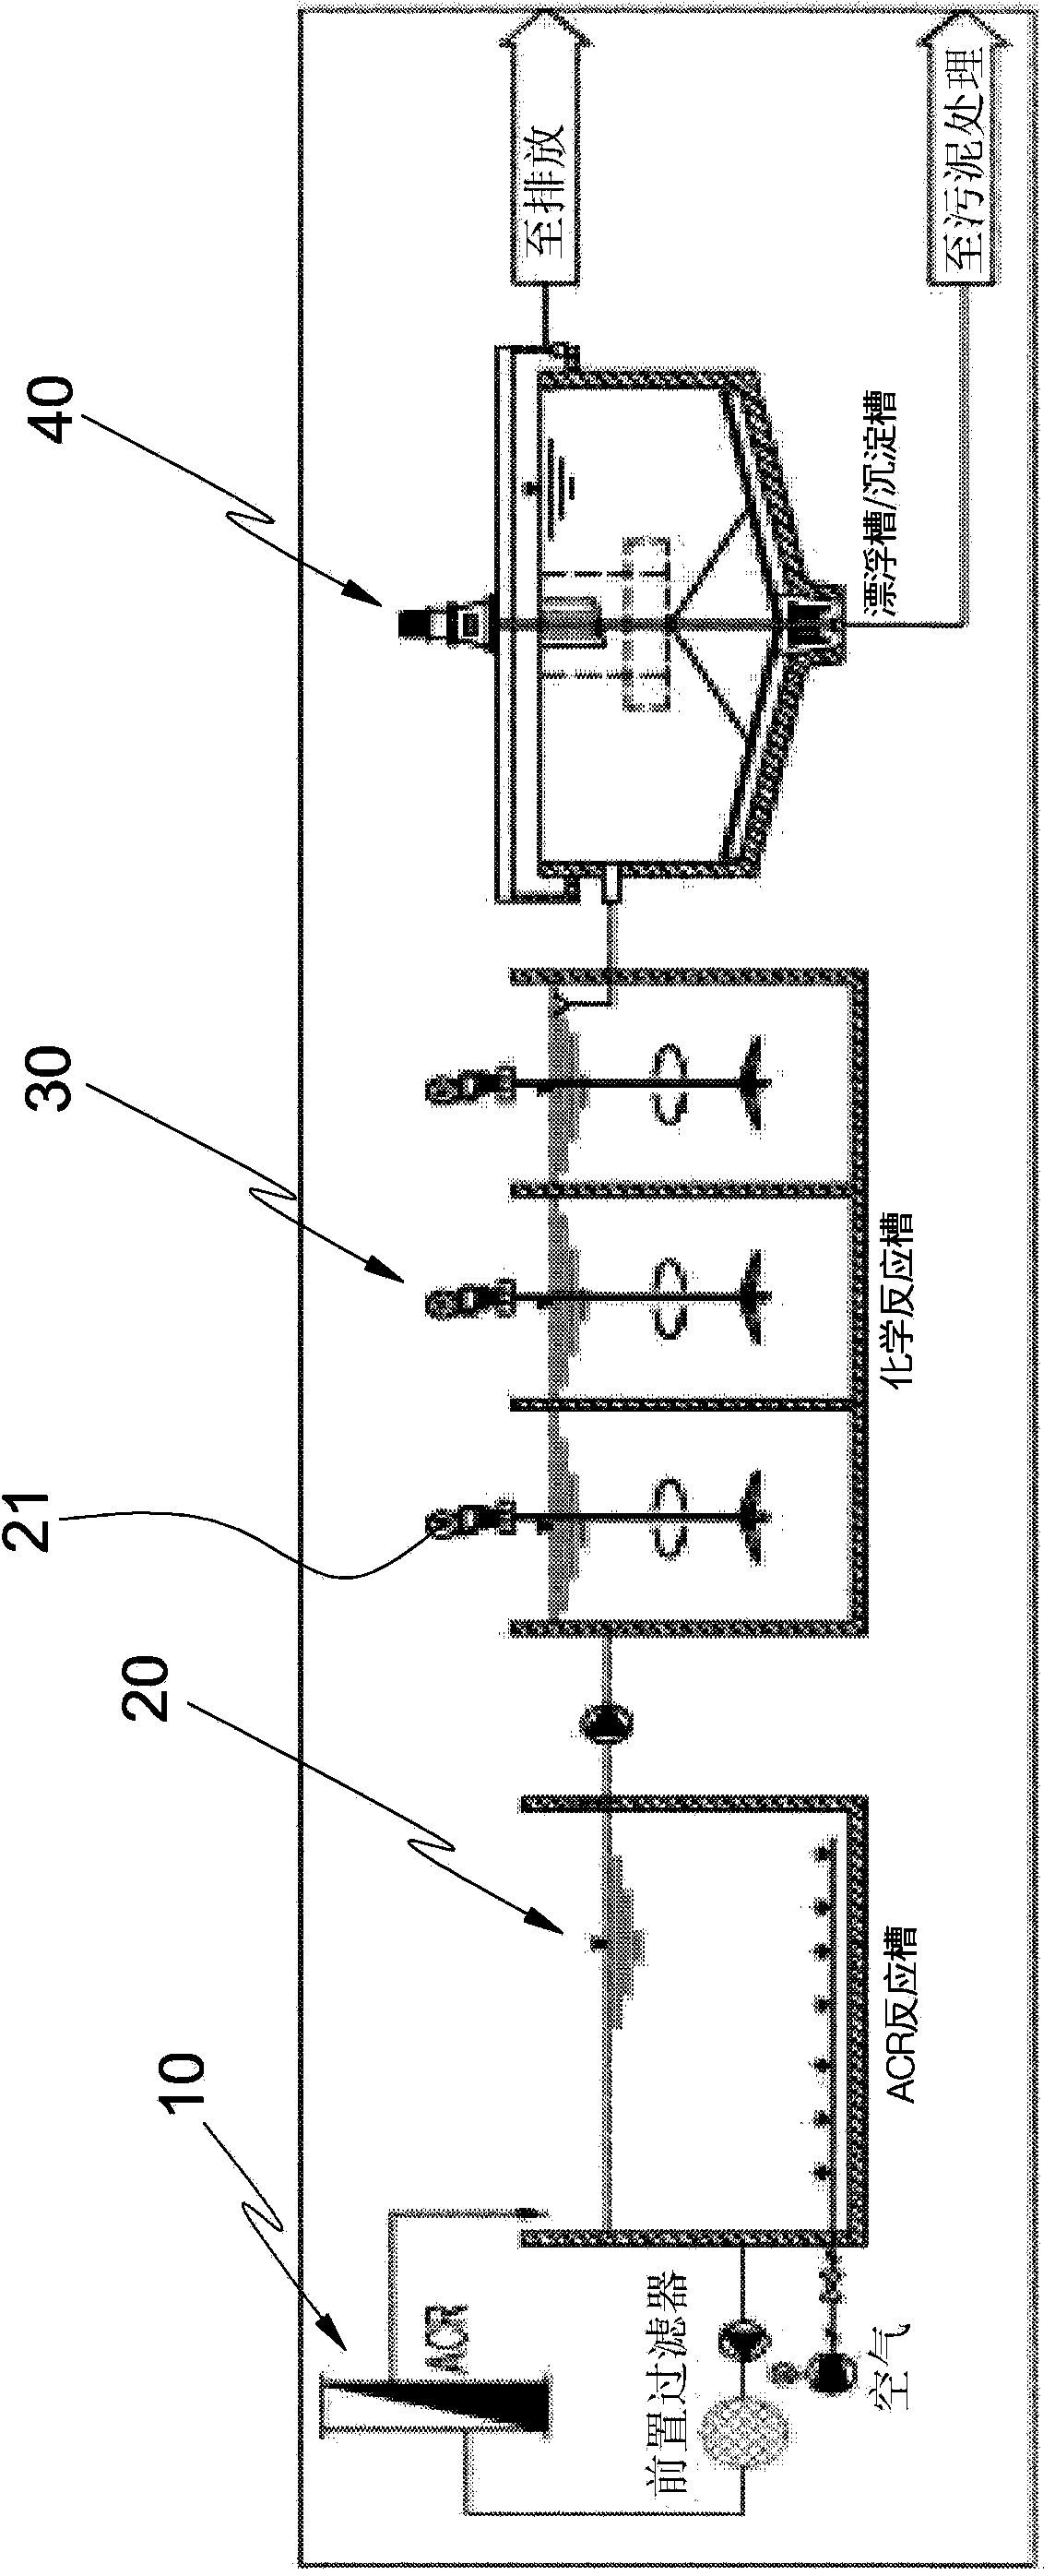 Water treatment system for treating ionic materials and hardly degradable substances by utilizing alloy catalytic reactor